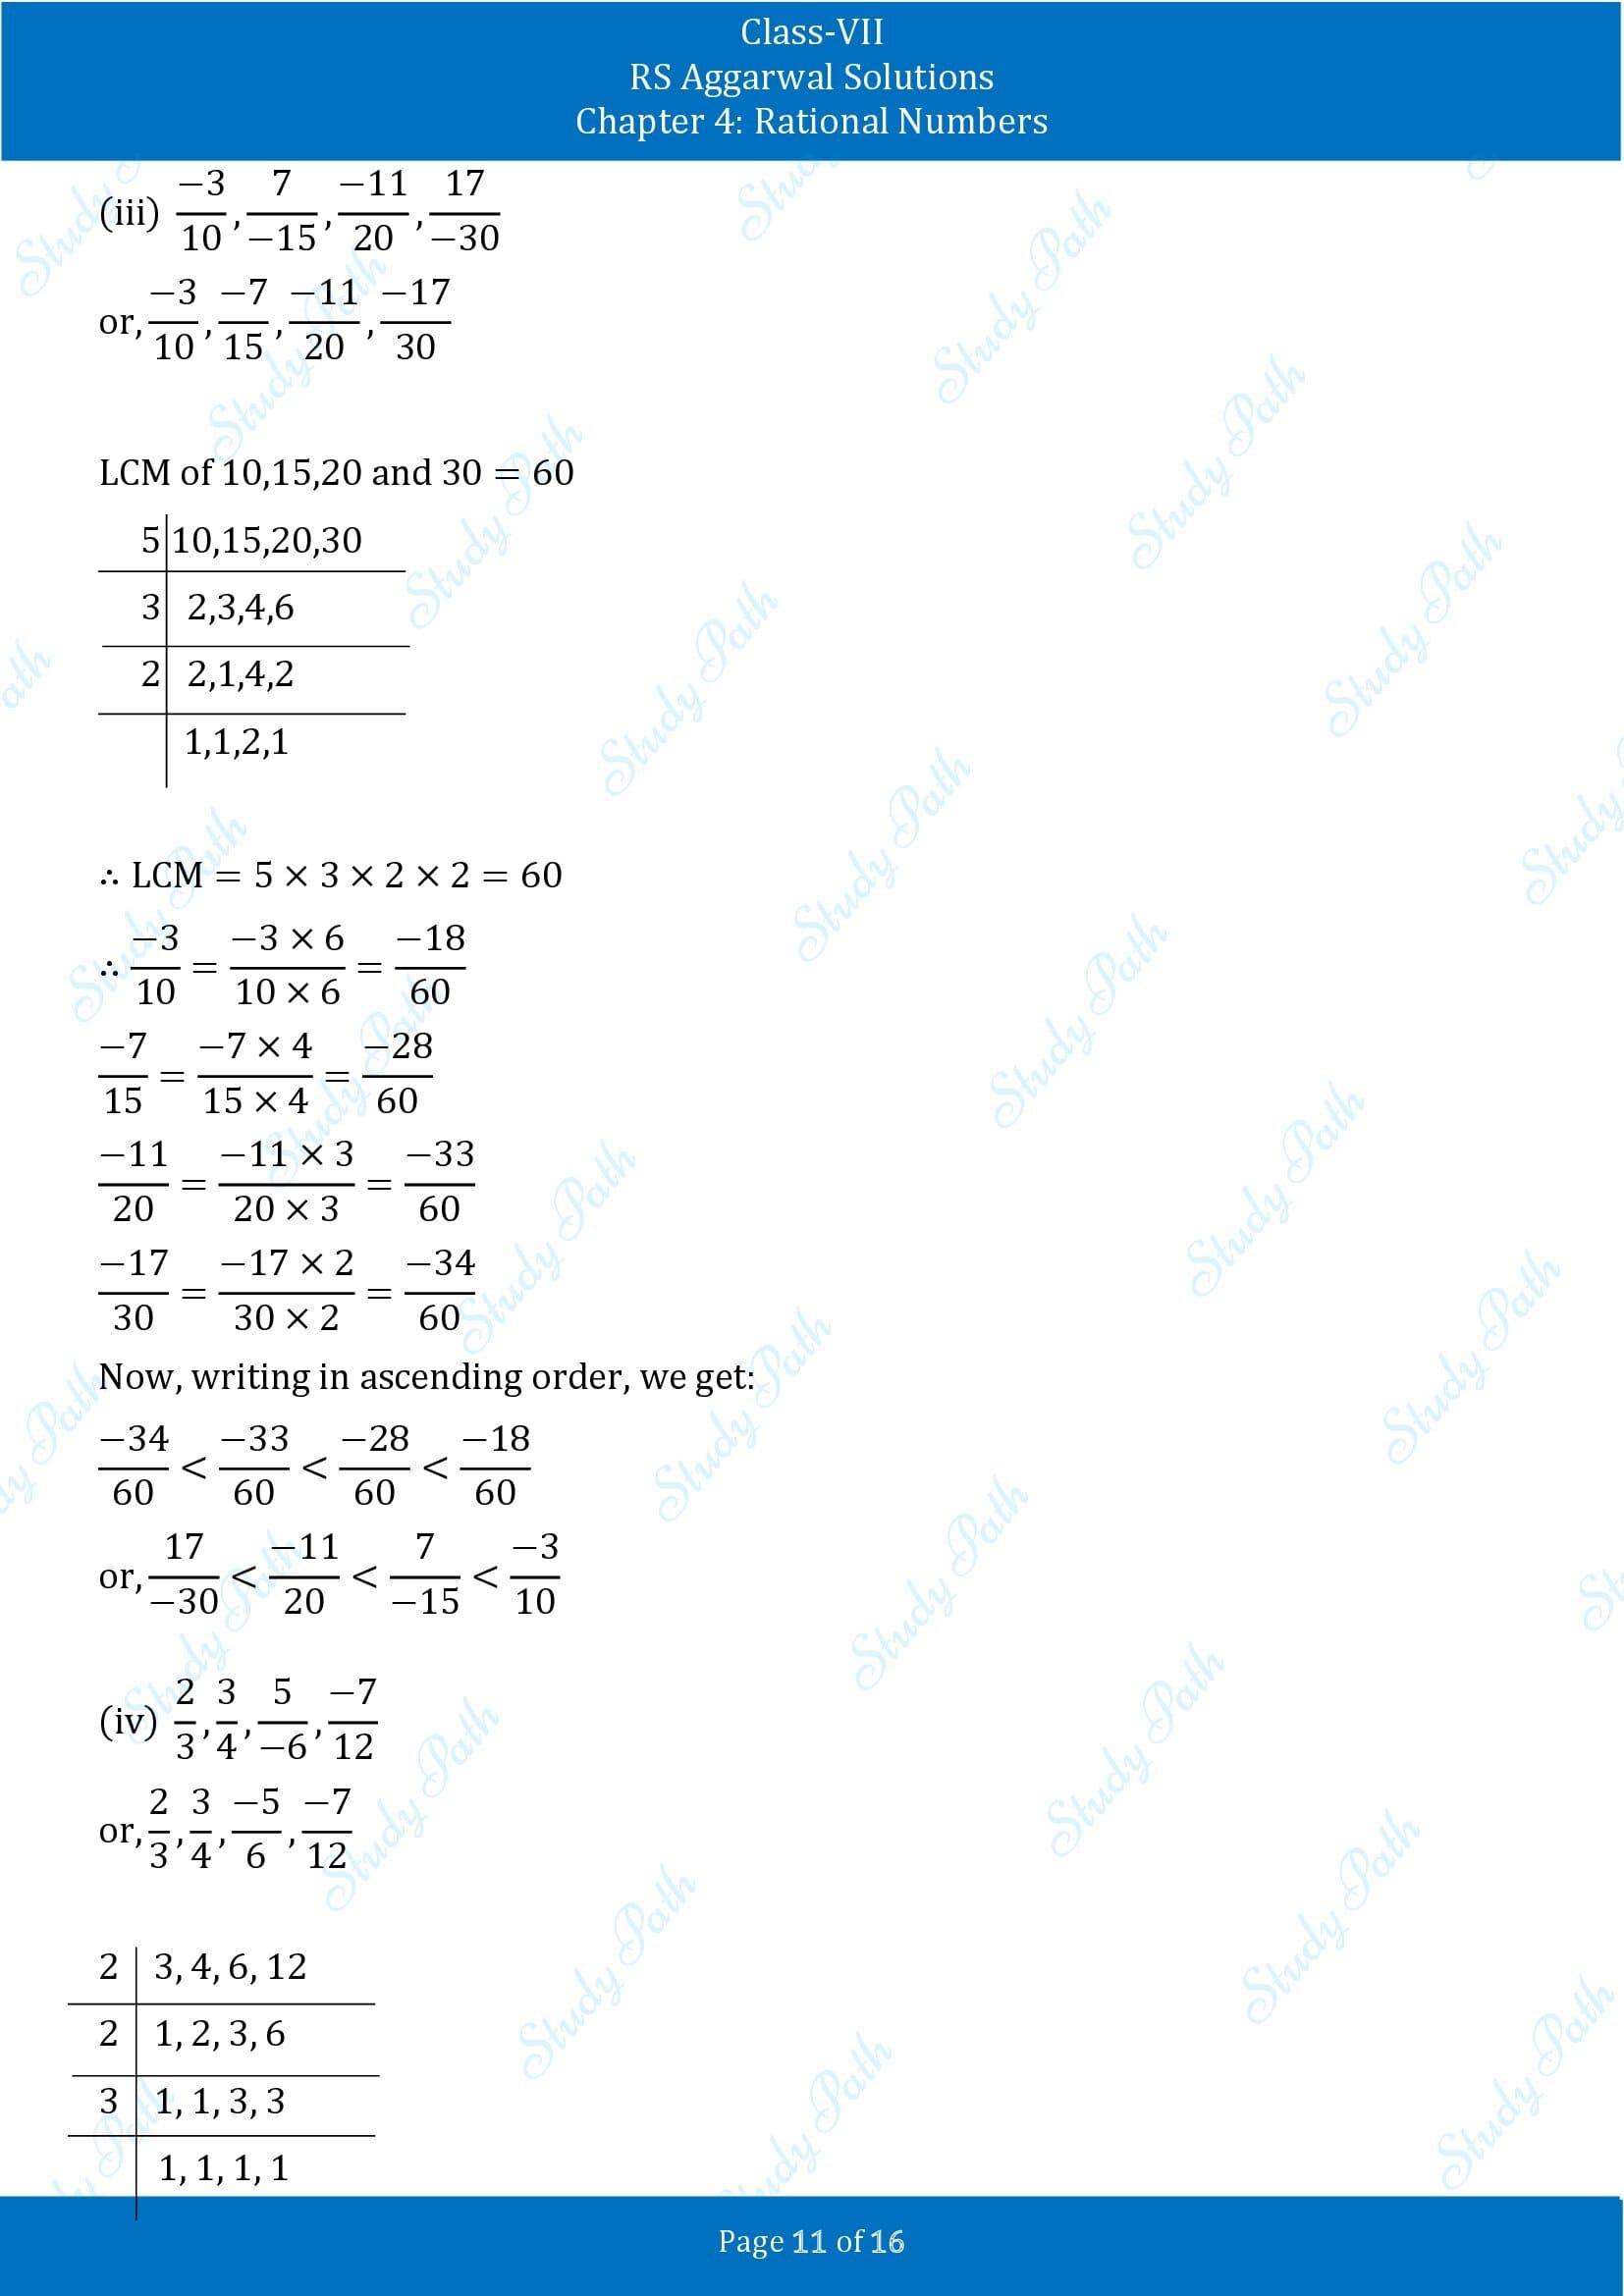 RS Aggarwal Solutions Class 7 Chapter 4 Rational Numbers Exercise 4B 00011